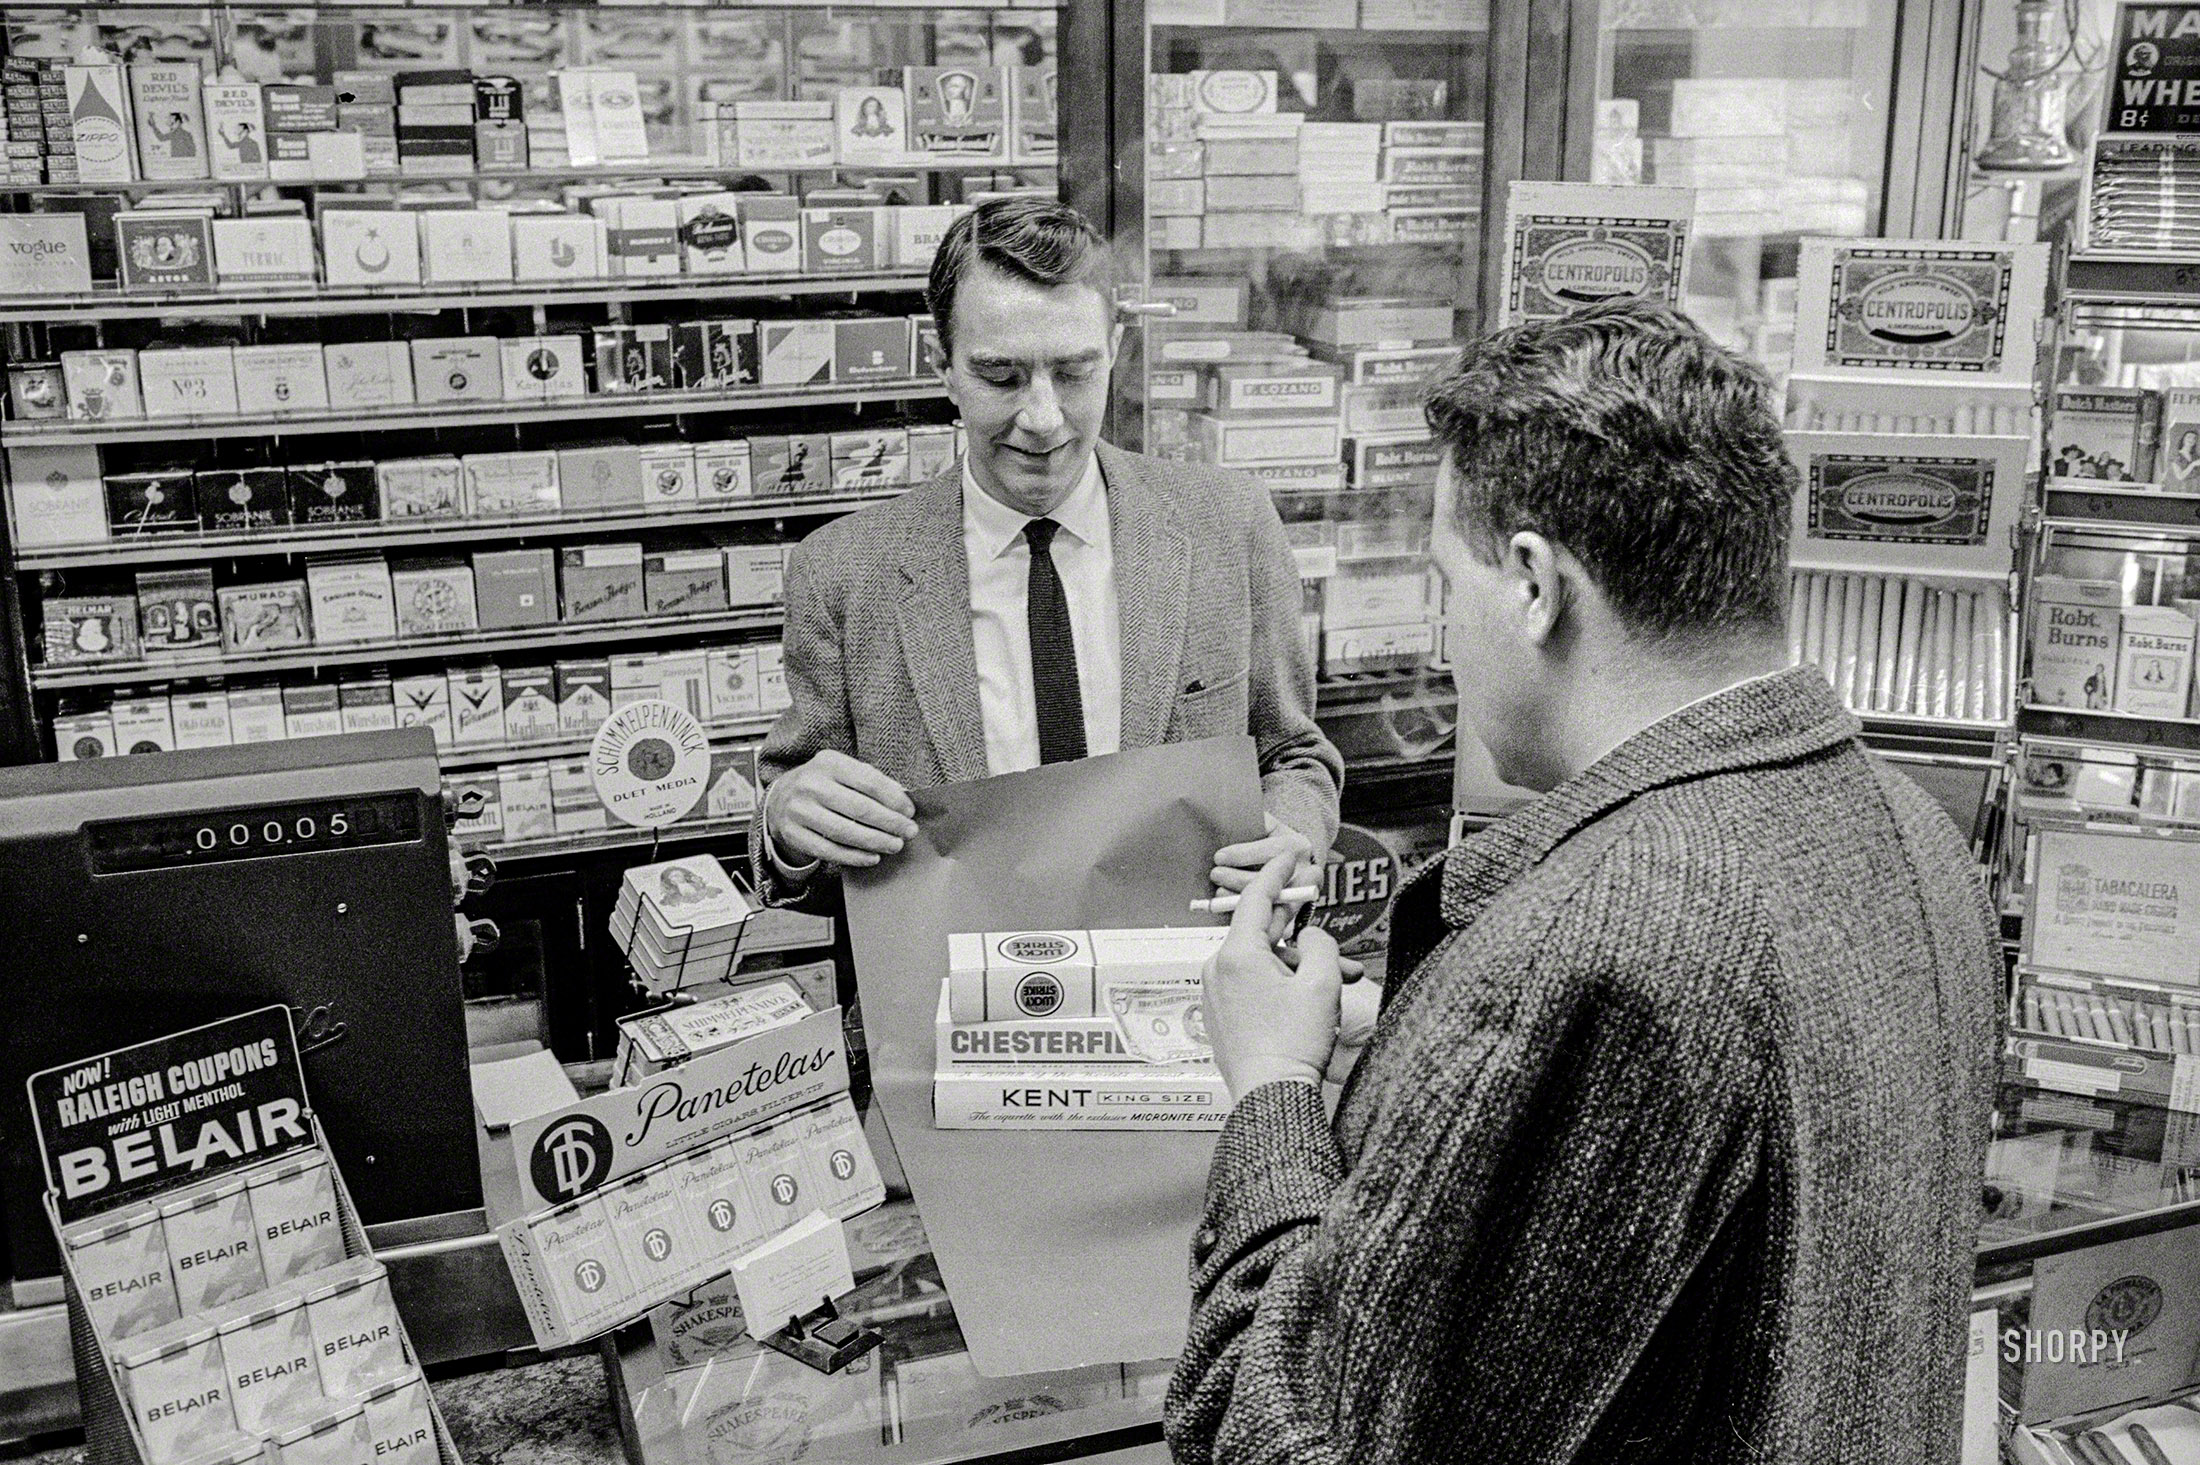 January 15, 1964. "Customer buying cigarettes from tobacconist." 35mm negative by T.J. O'Halloran for U.S. News & World Report. View full size.